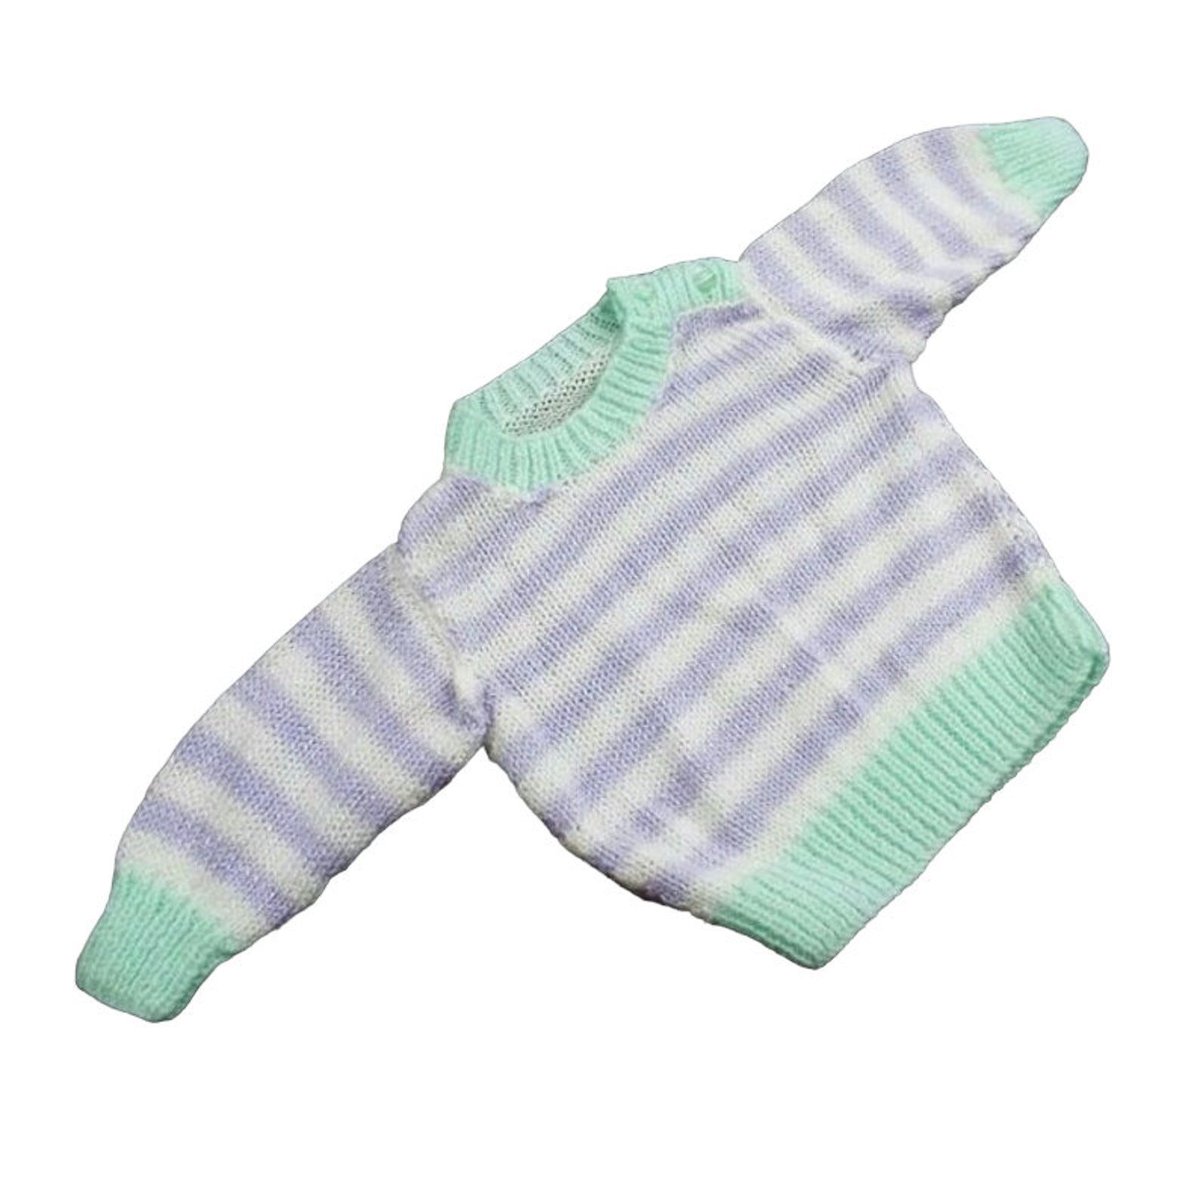 Dress your little one in this hand-knitted baby jumper in lovely lilac and white stripes! Suitable for 3-6 months old. Grab it now on #Etsy: knittingtopia.etsy.com/listing/168982… #Knittingtopia #Handmade #MHHSBD #craftbizparty #babyessentials #shophandmade